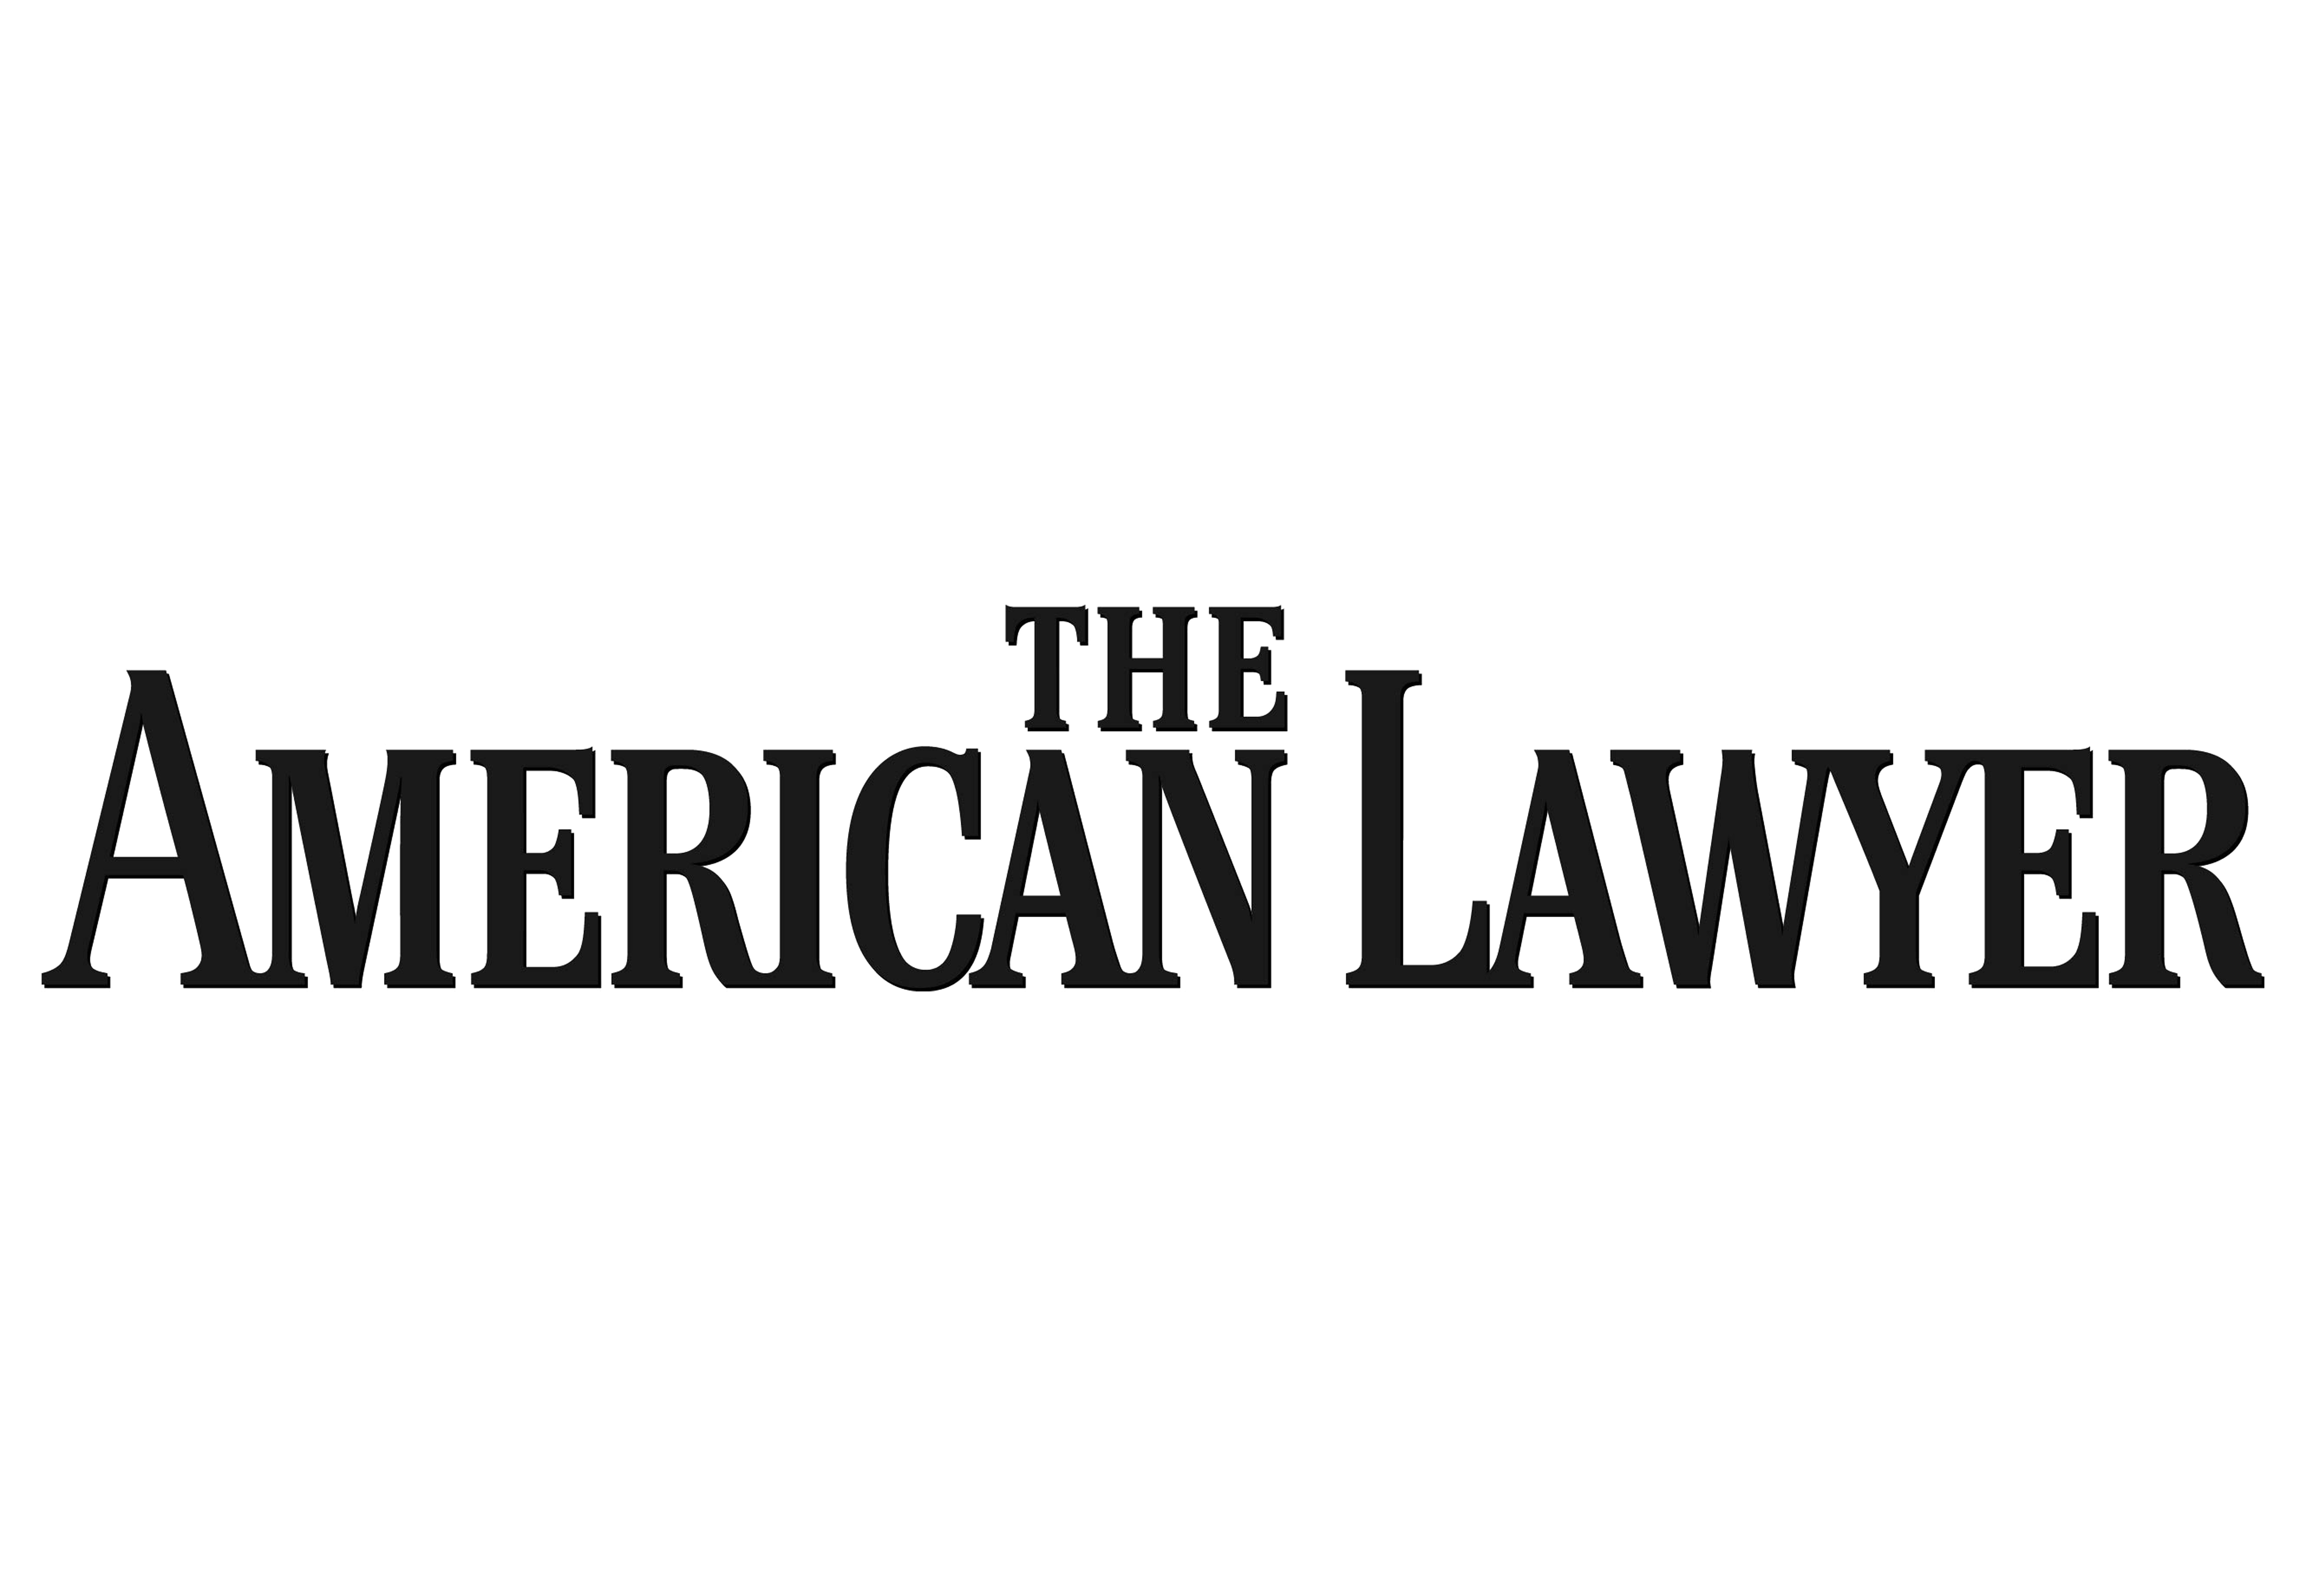 The logo of The American Lawyer.